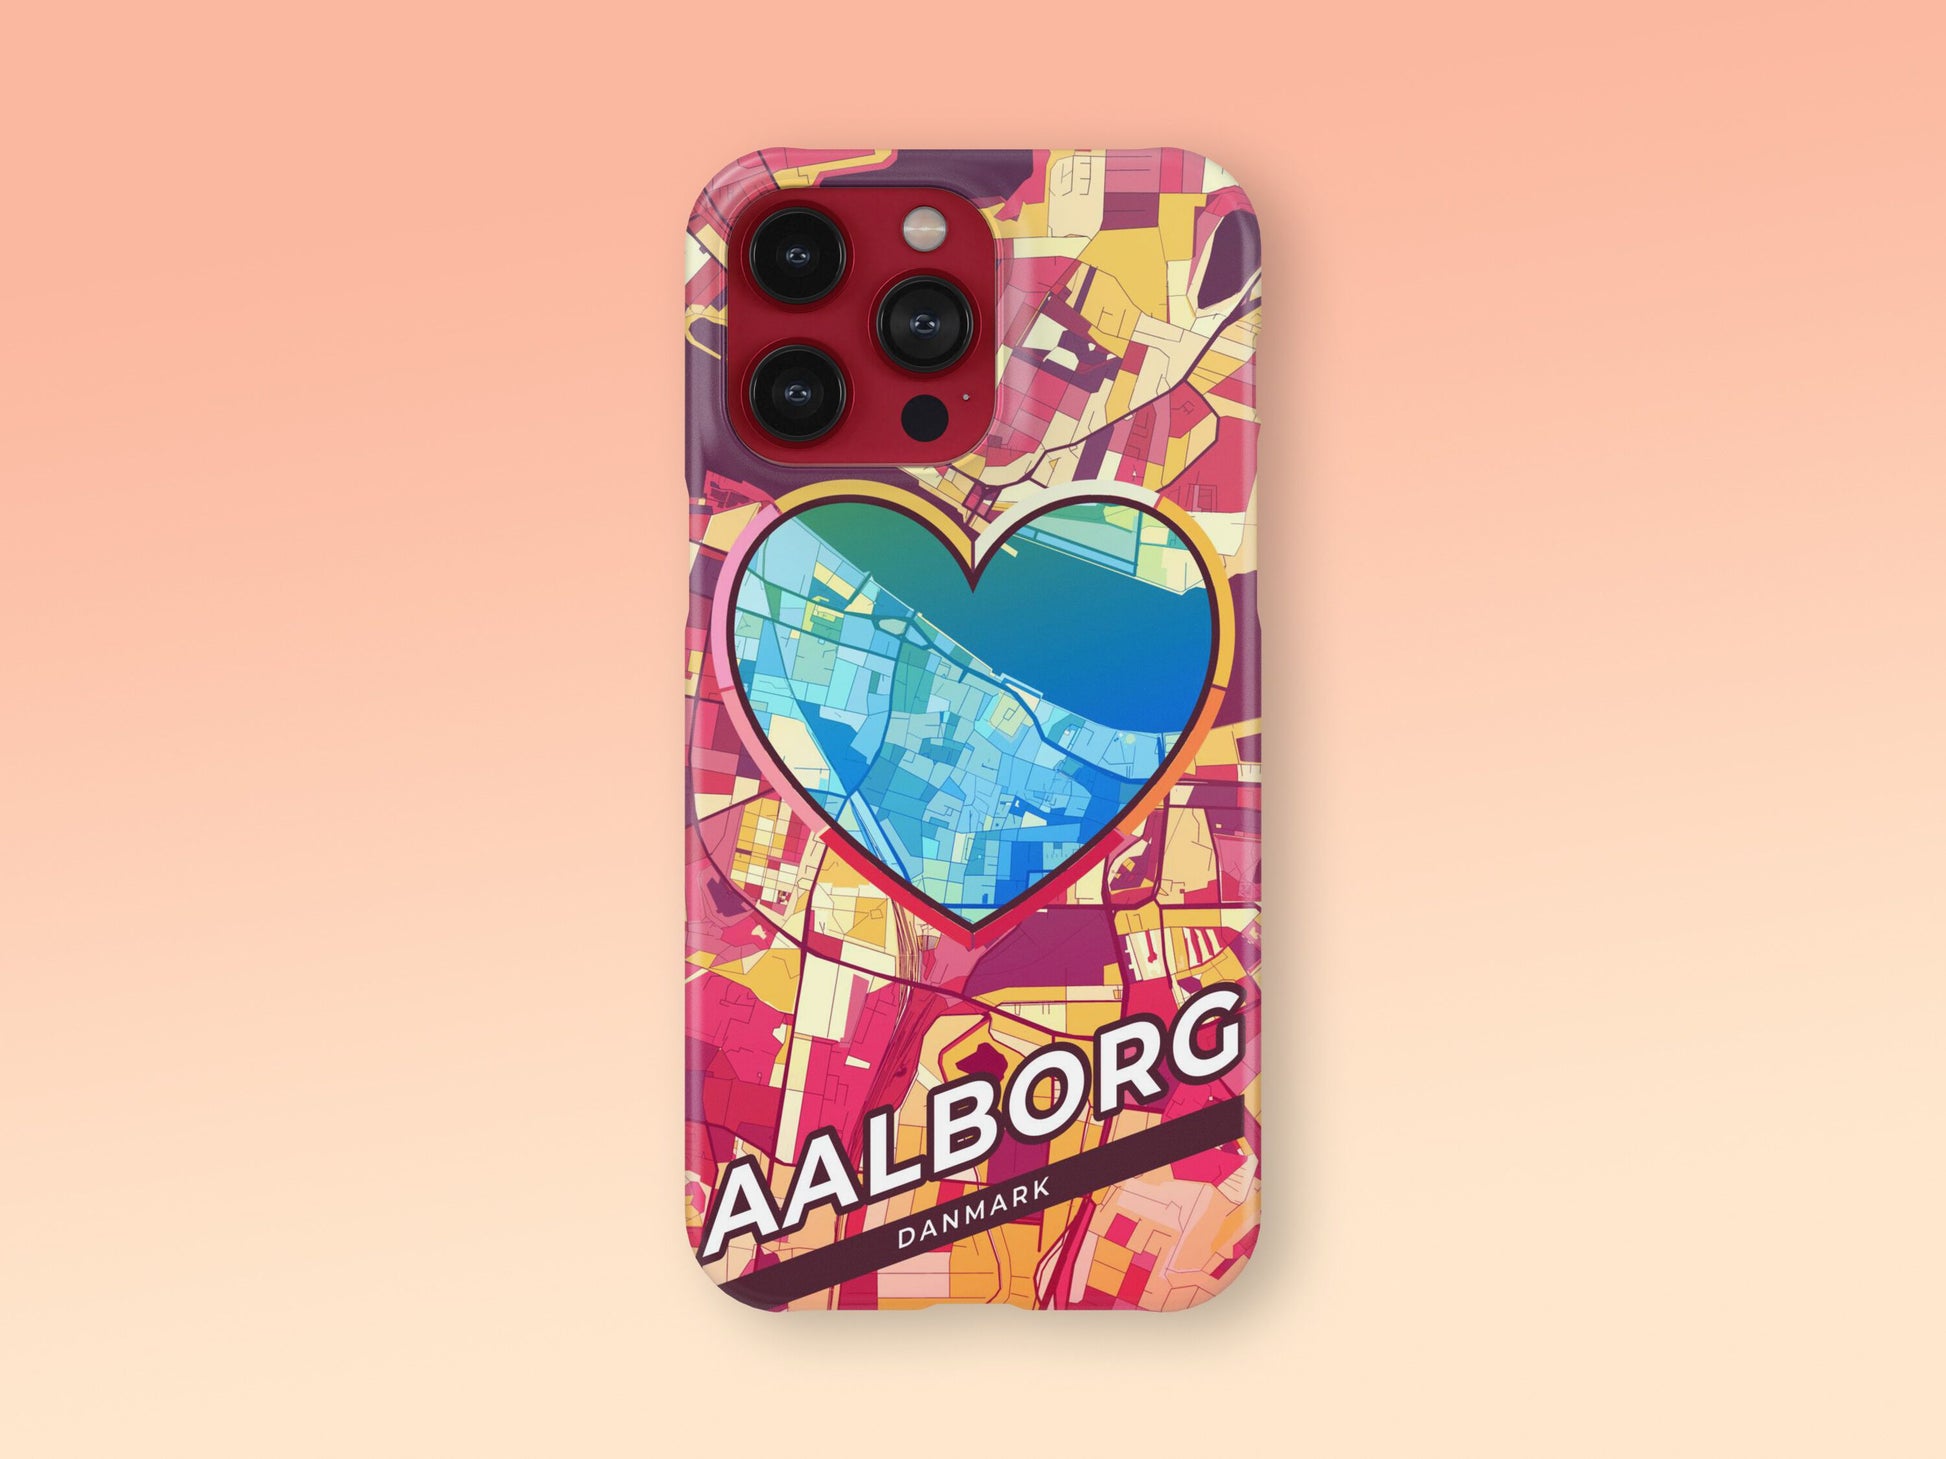 Aalborg Danmark slim phone case with colorful icon. Birthday, wedding or housewarming gift. Couple match cases. 2